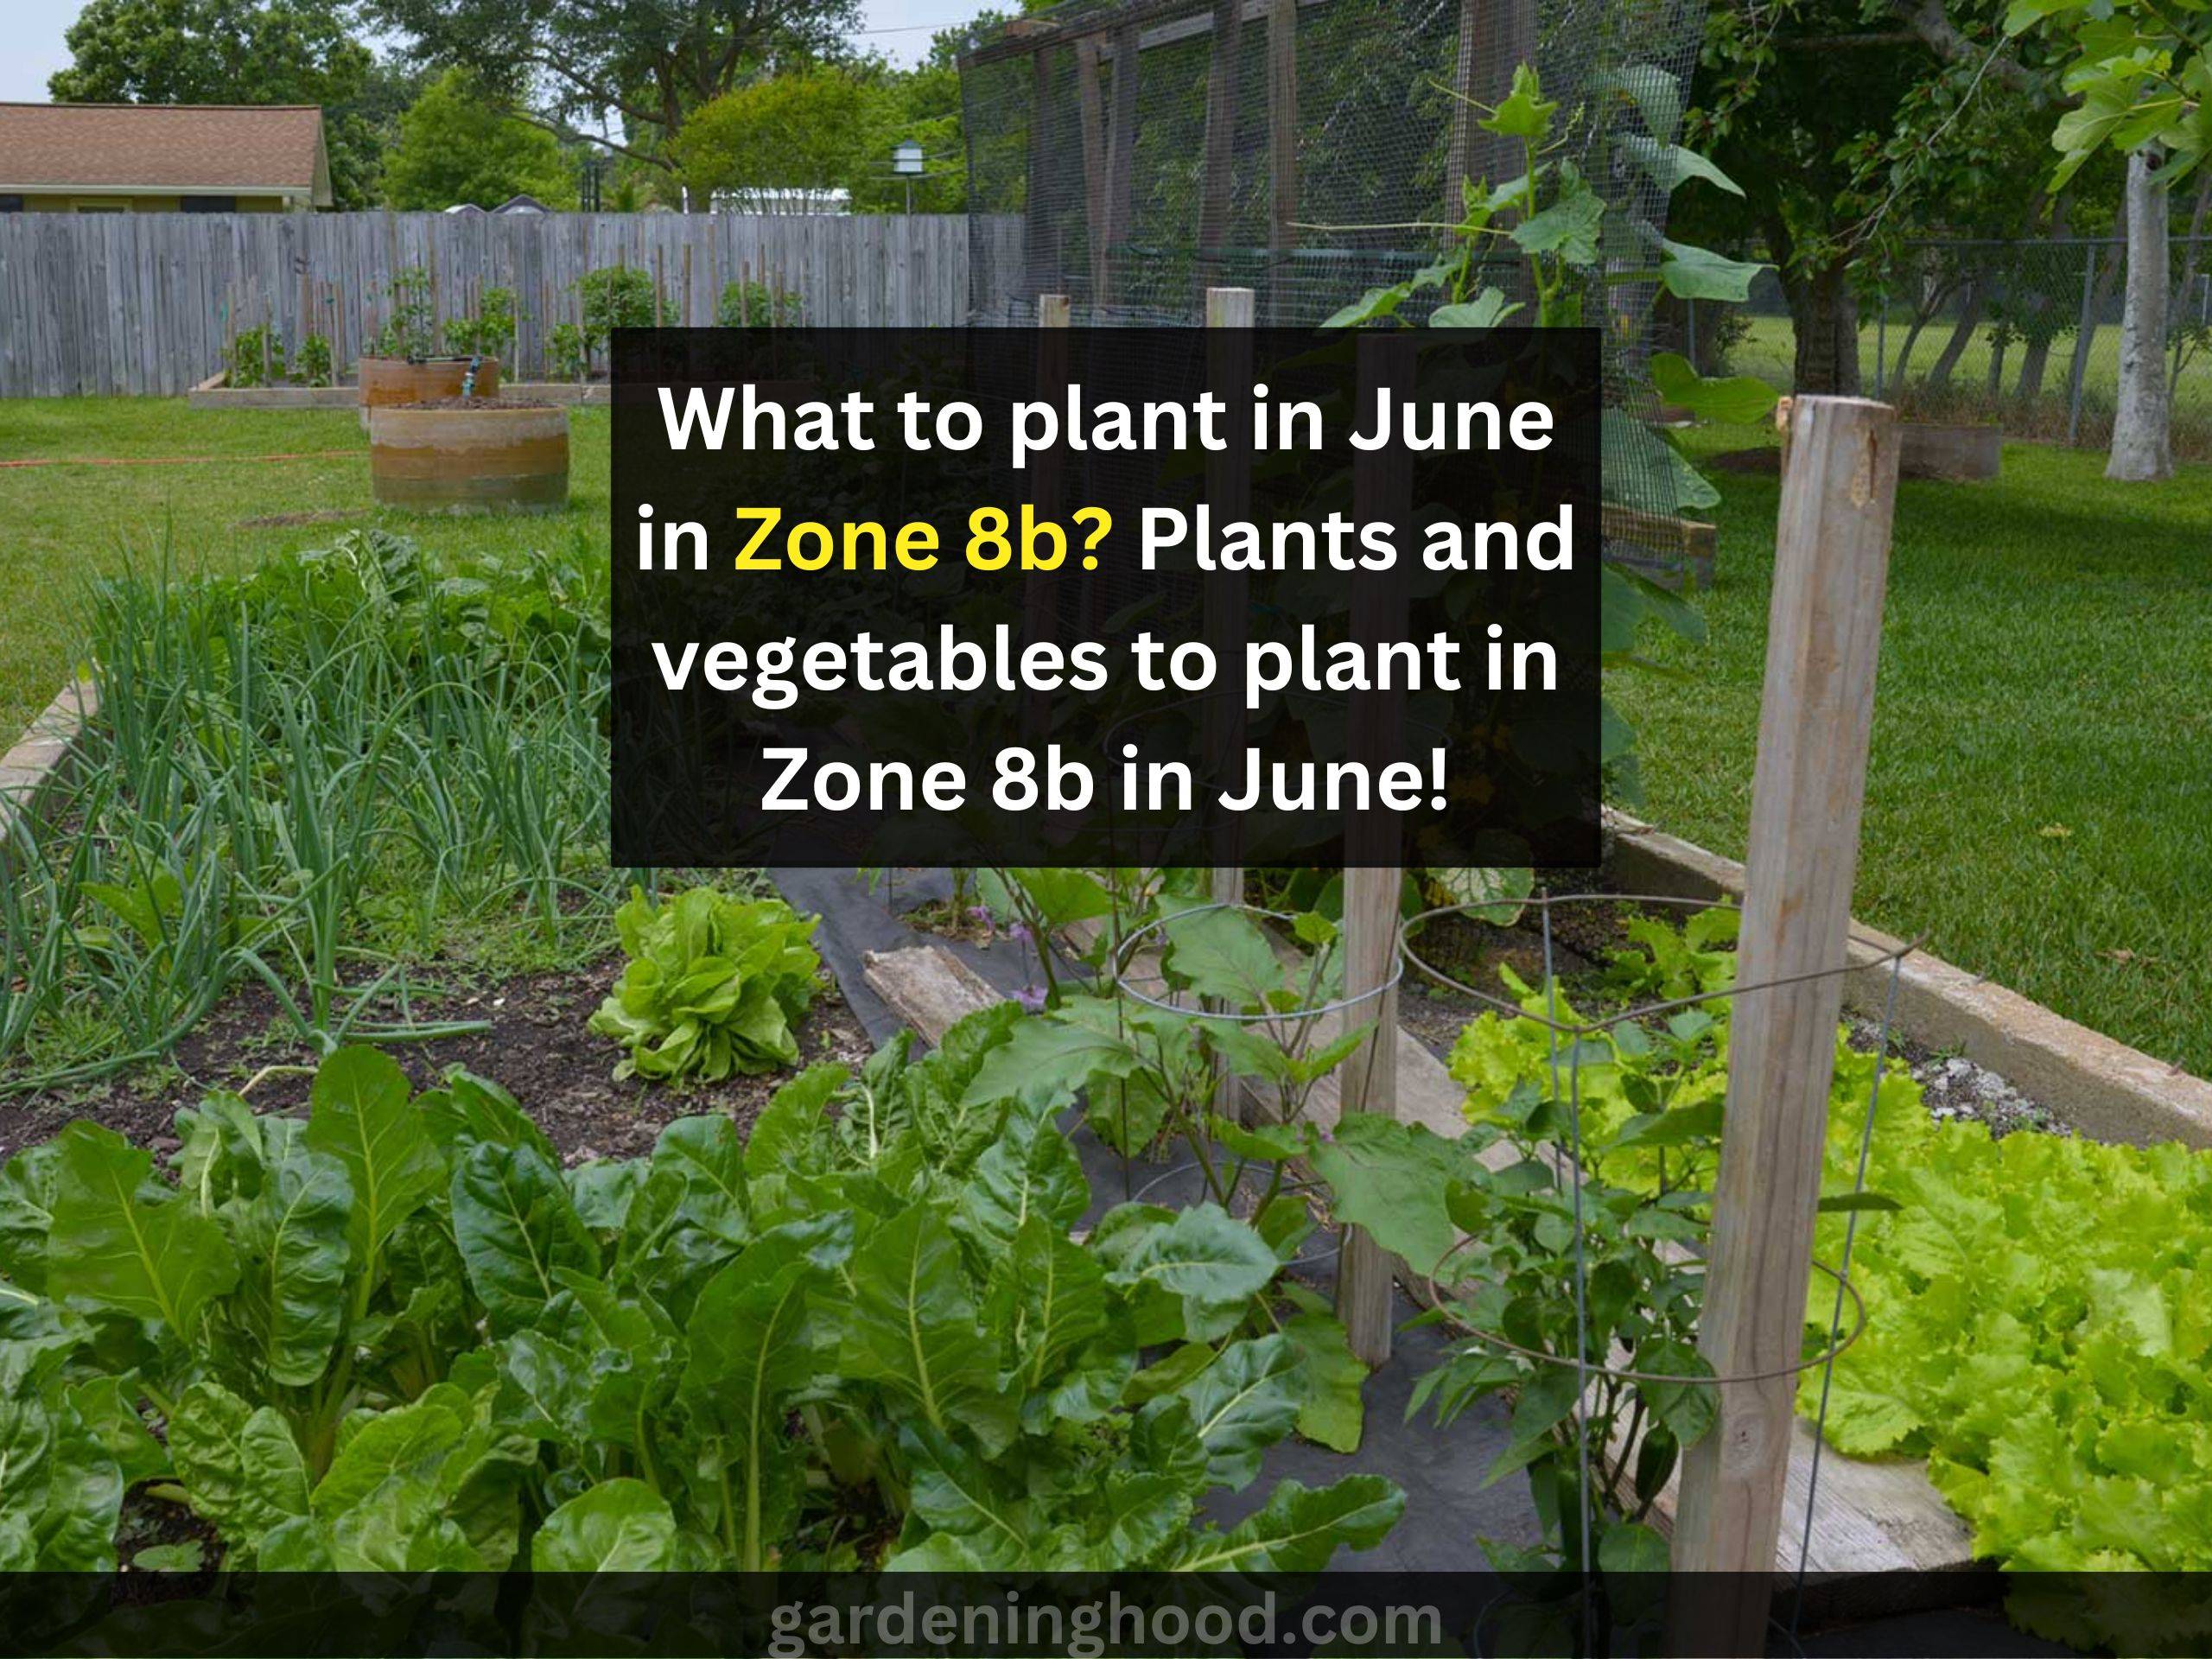 What to plant in June in Zone 8b? Plants and vegetables to plant in Zone 8b in June!